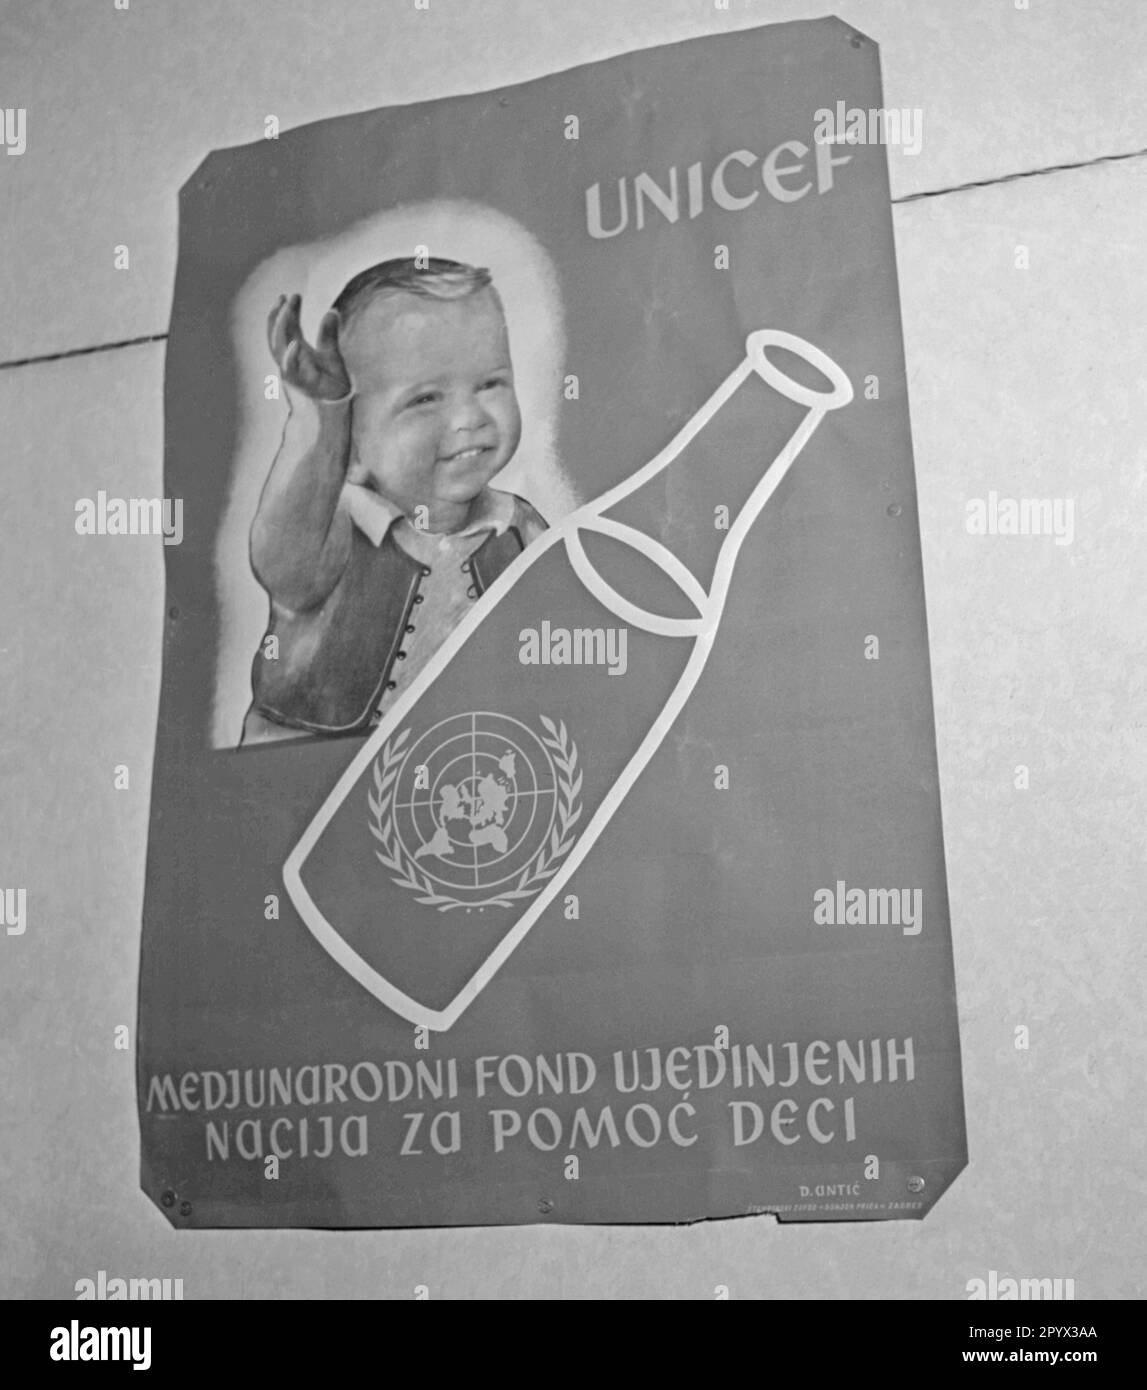 Poster for the United Nations Children's Fund (UNICEF) in Serbo-Croatian from Zagreb. Next to a waving child is a milk bottle. Stock Photo